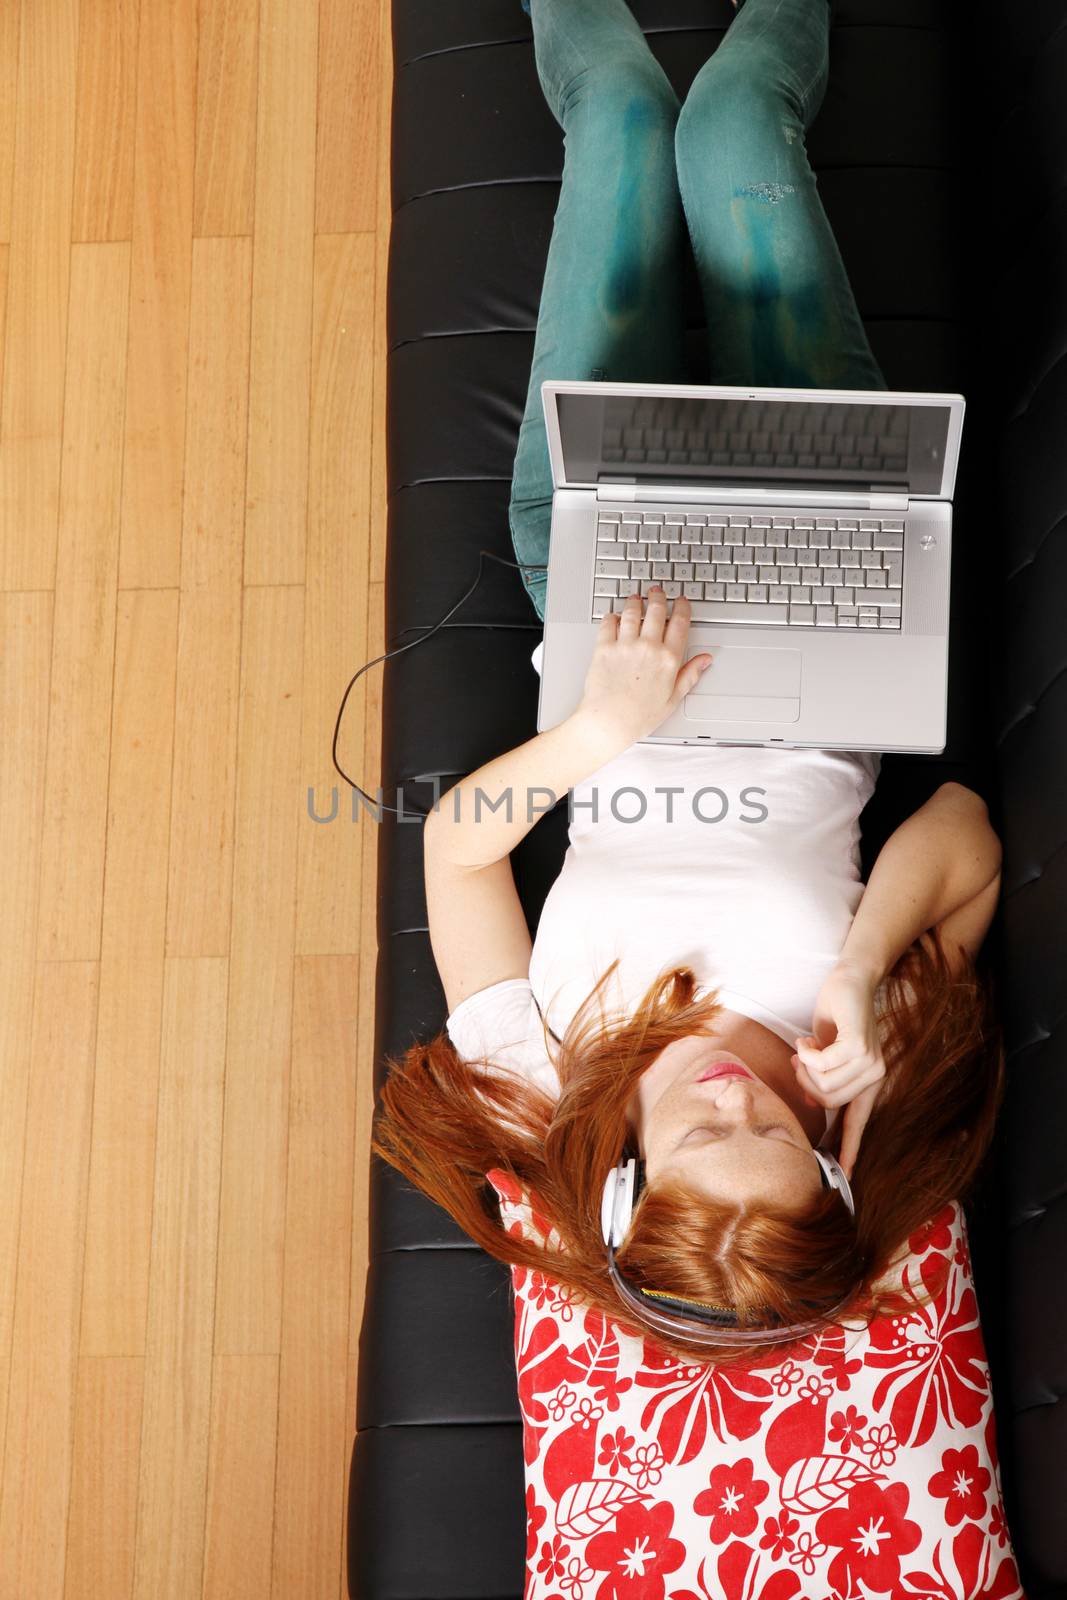 A young woman surfing on the Internet with a Laptop.  